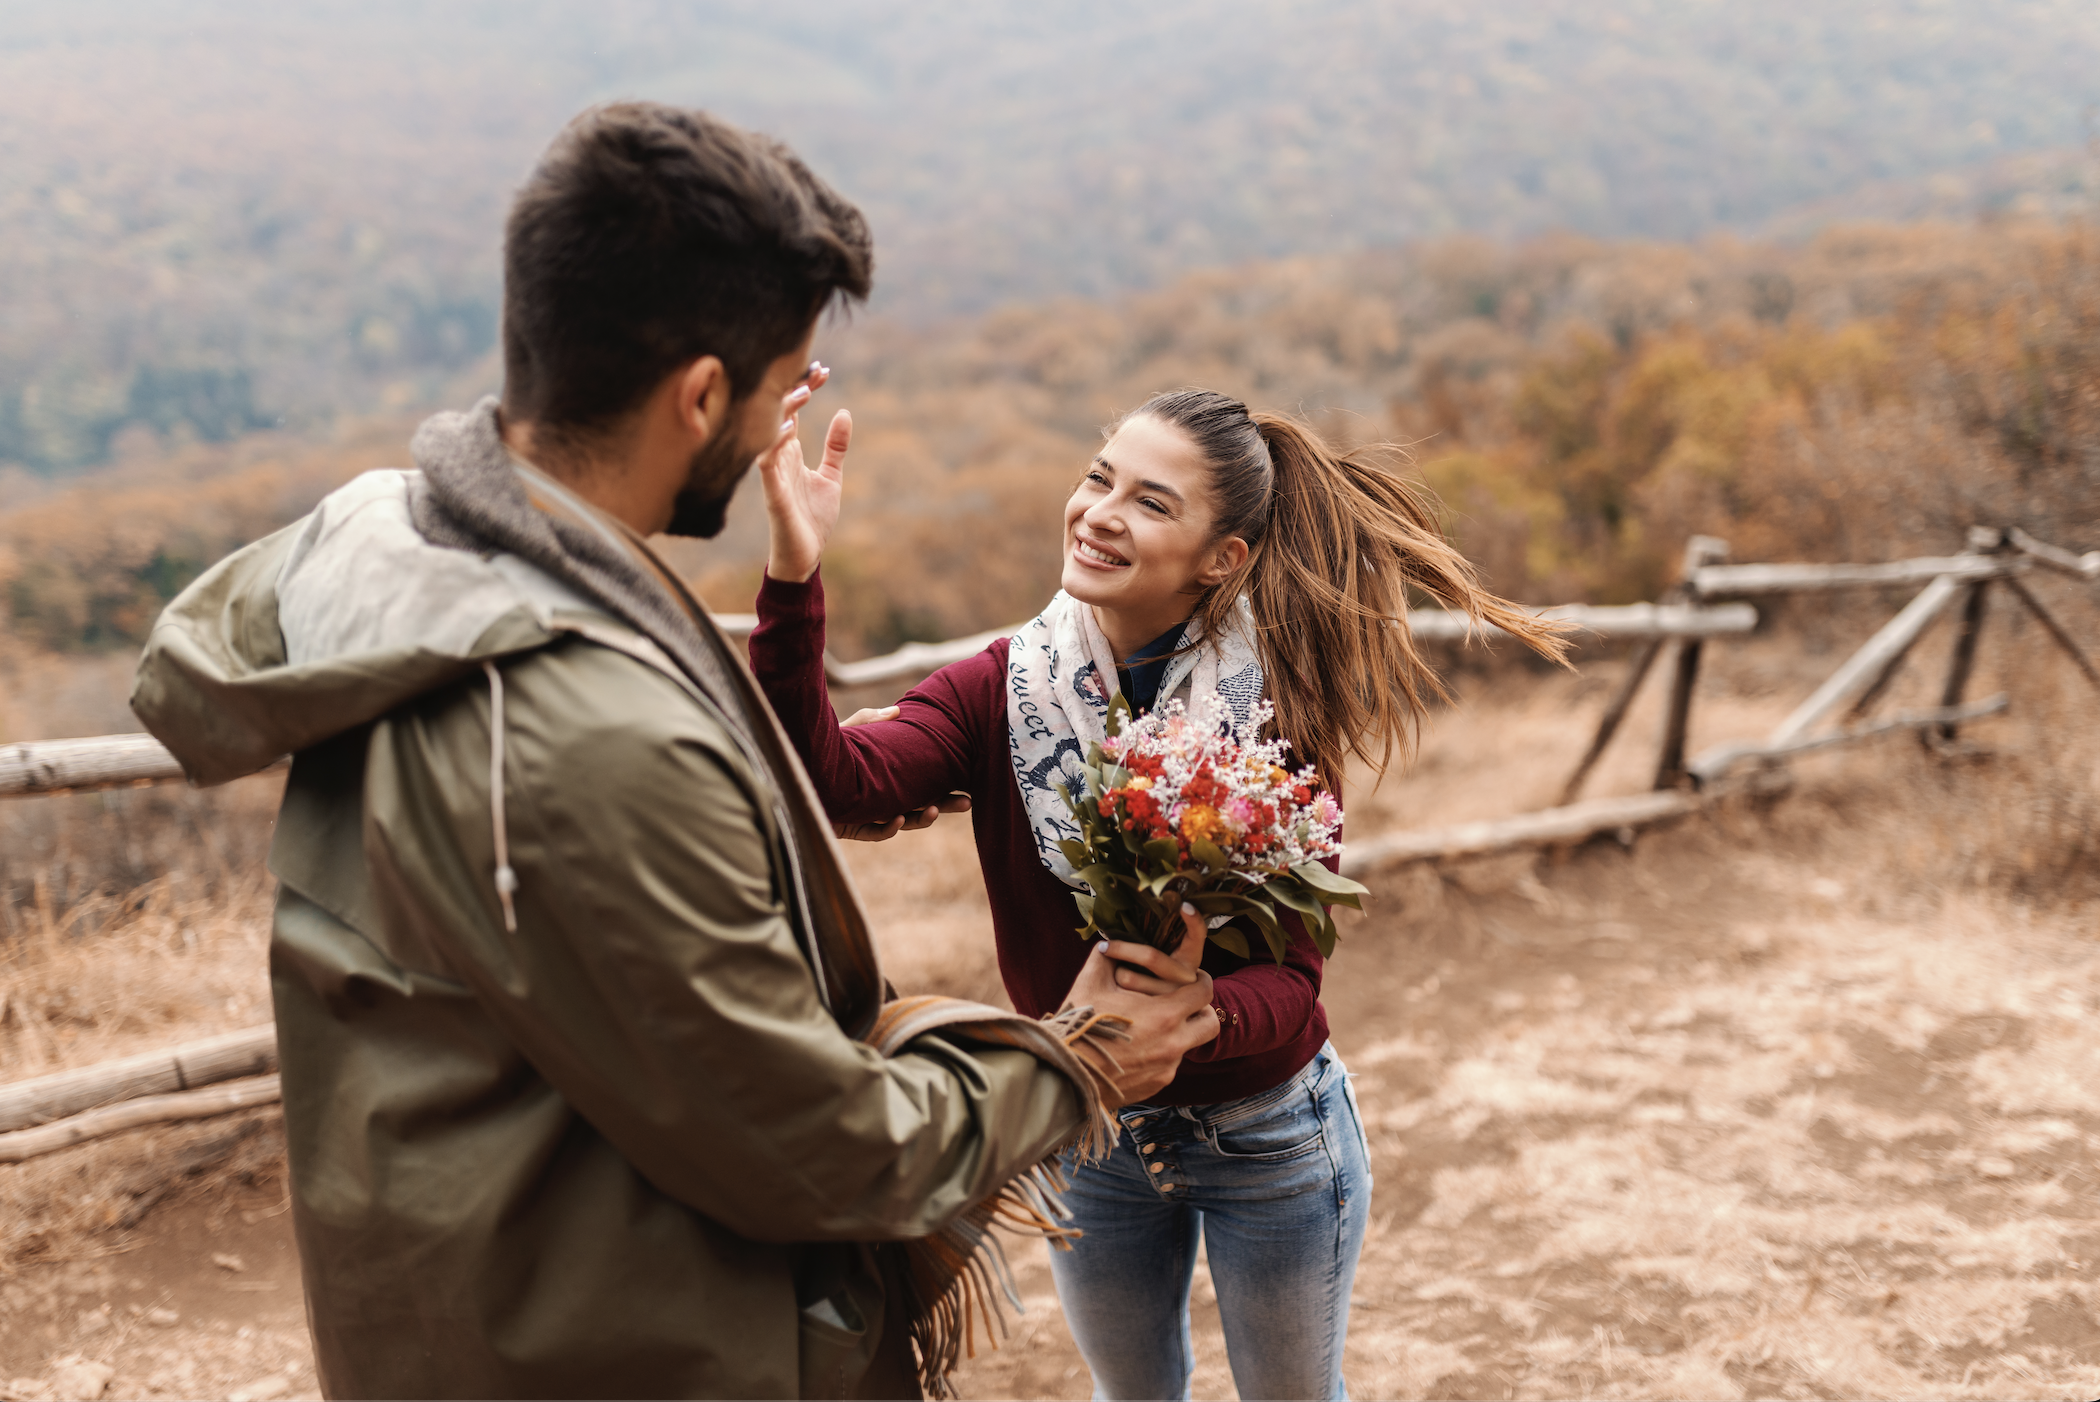 A man gifts his partner with flowers